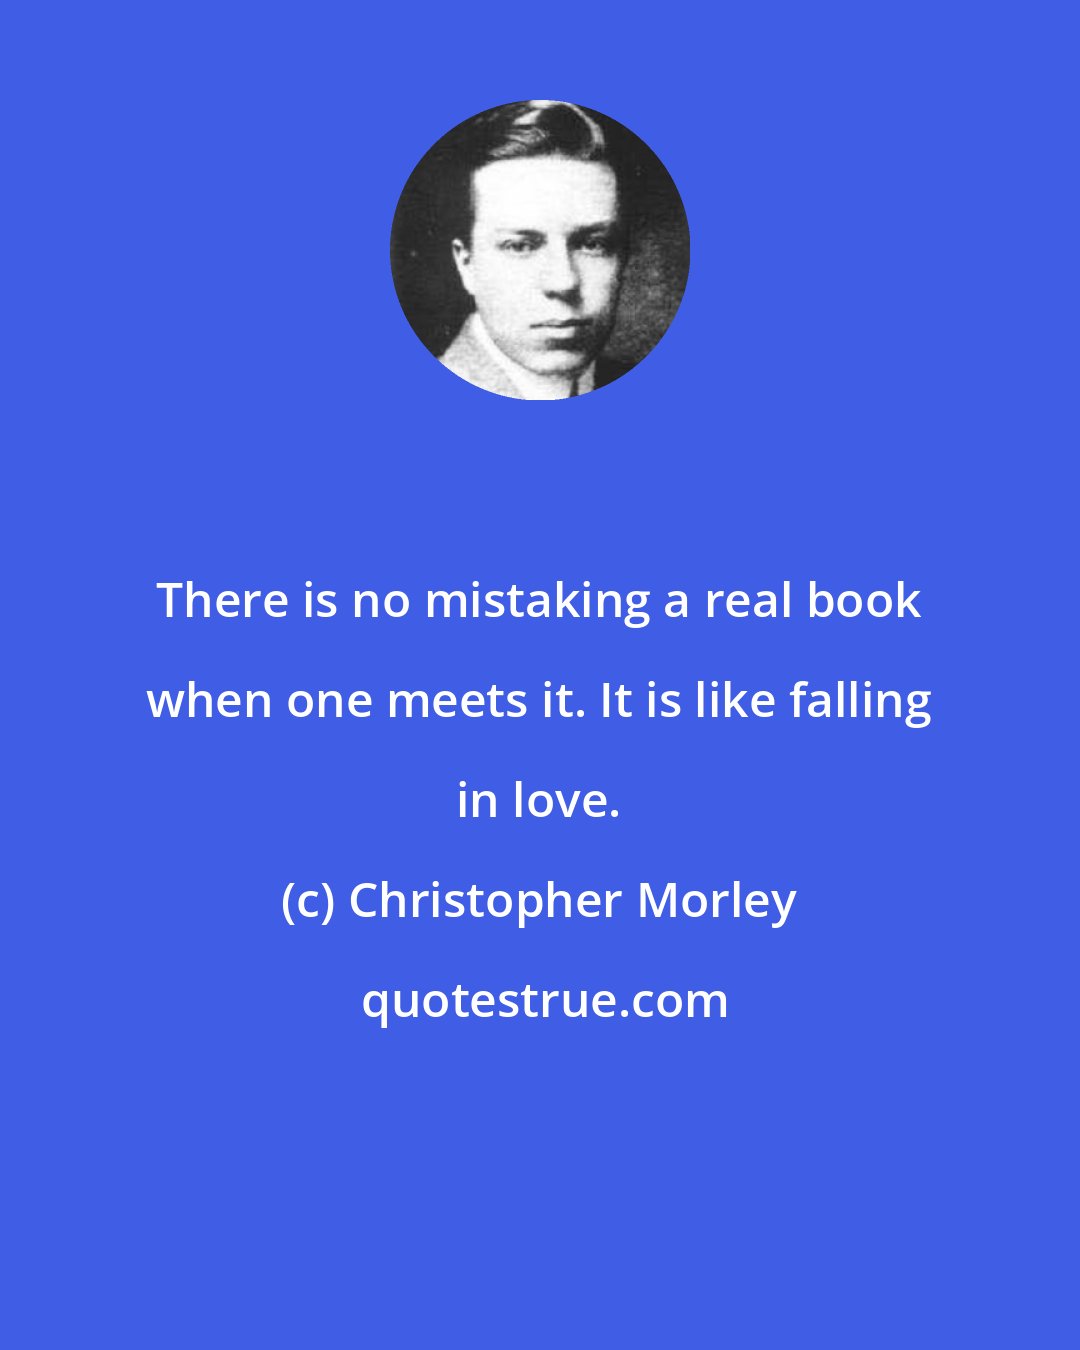 Christopher Morley: There is no mistaking a real book when one meets it. It is like falling in love.